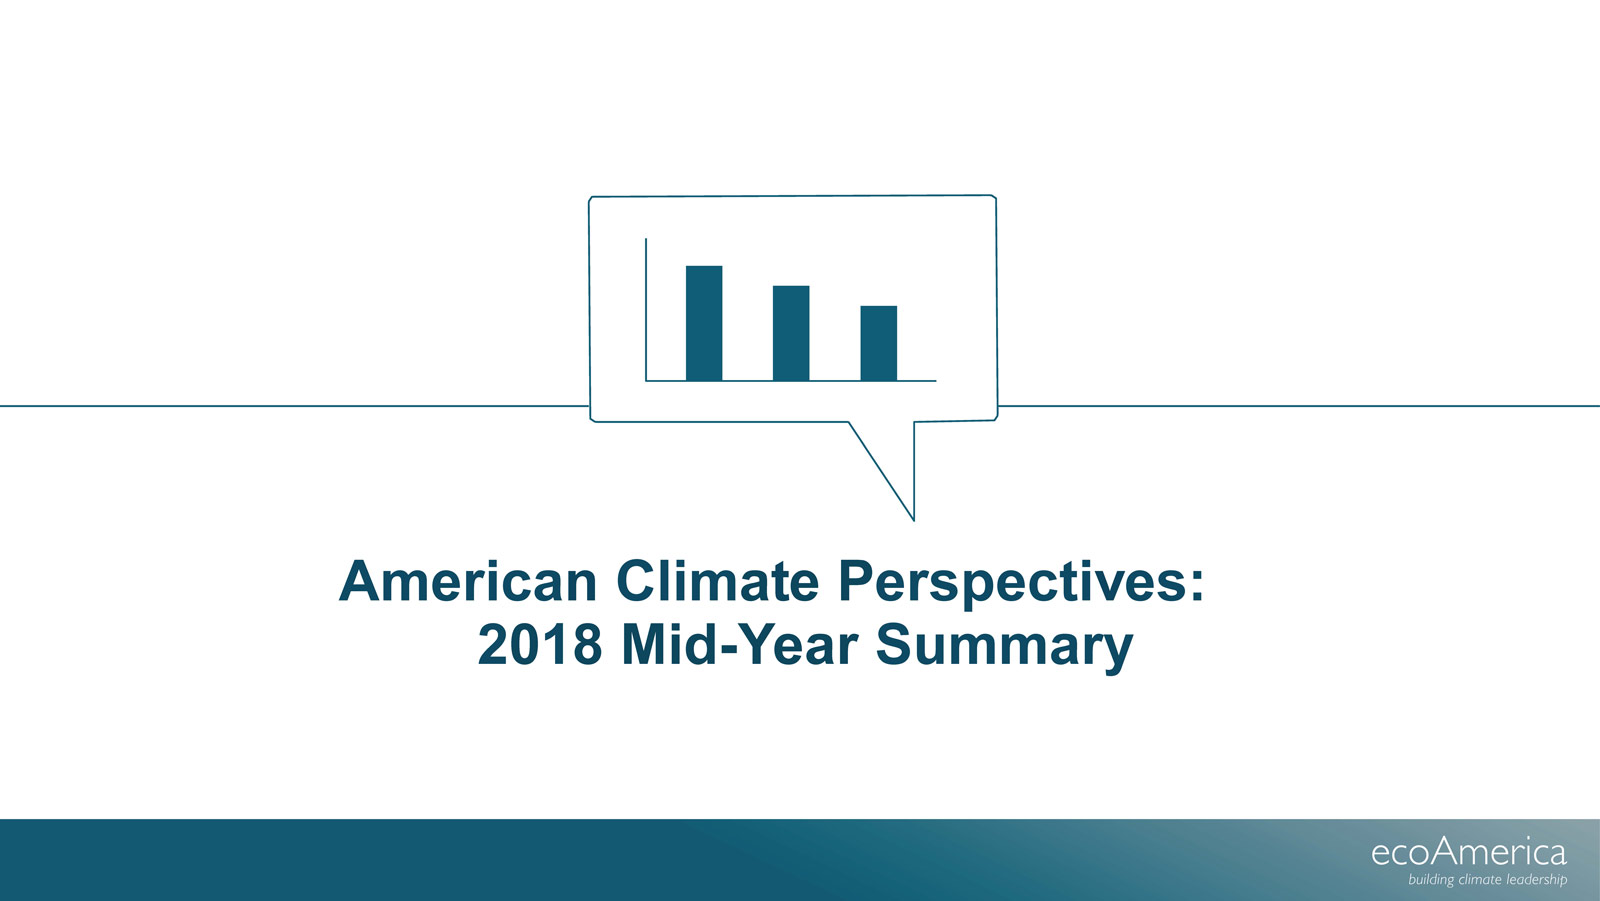 American Climate Perspectives 2018 mid-yer summary research